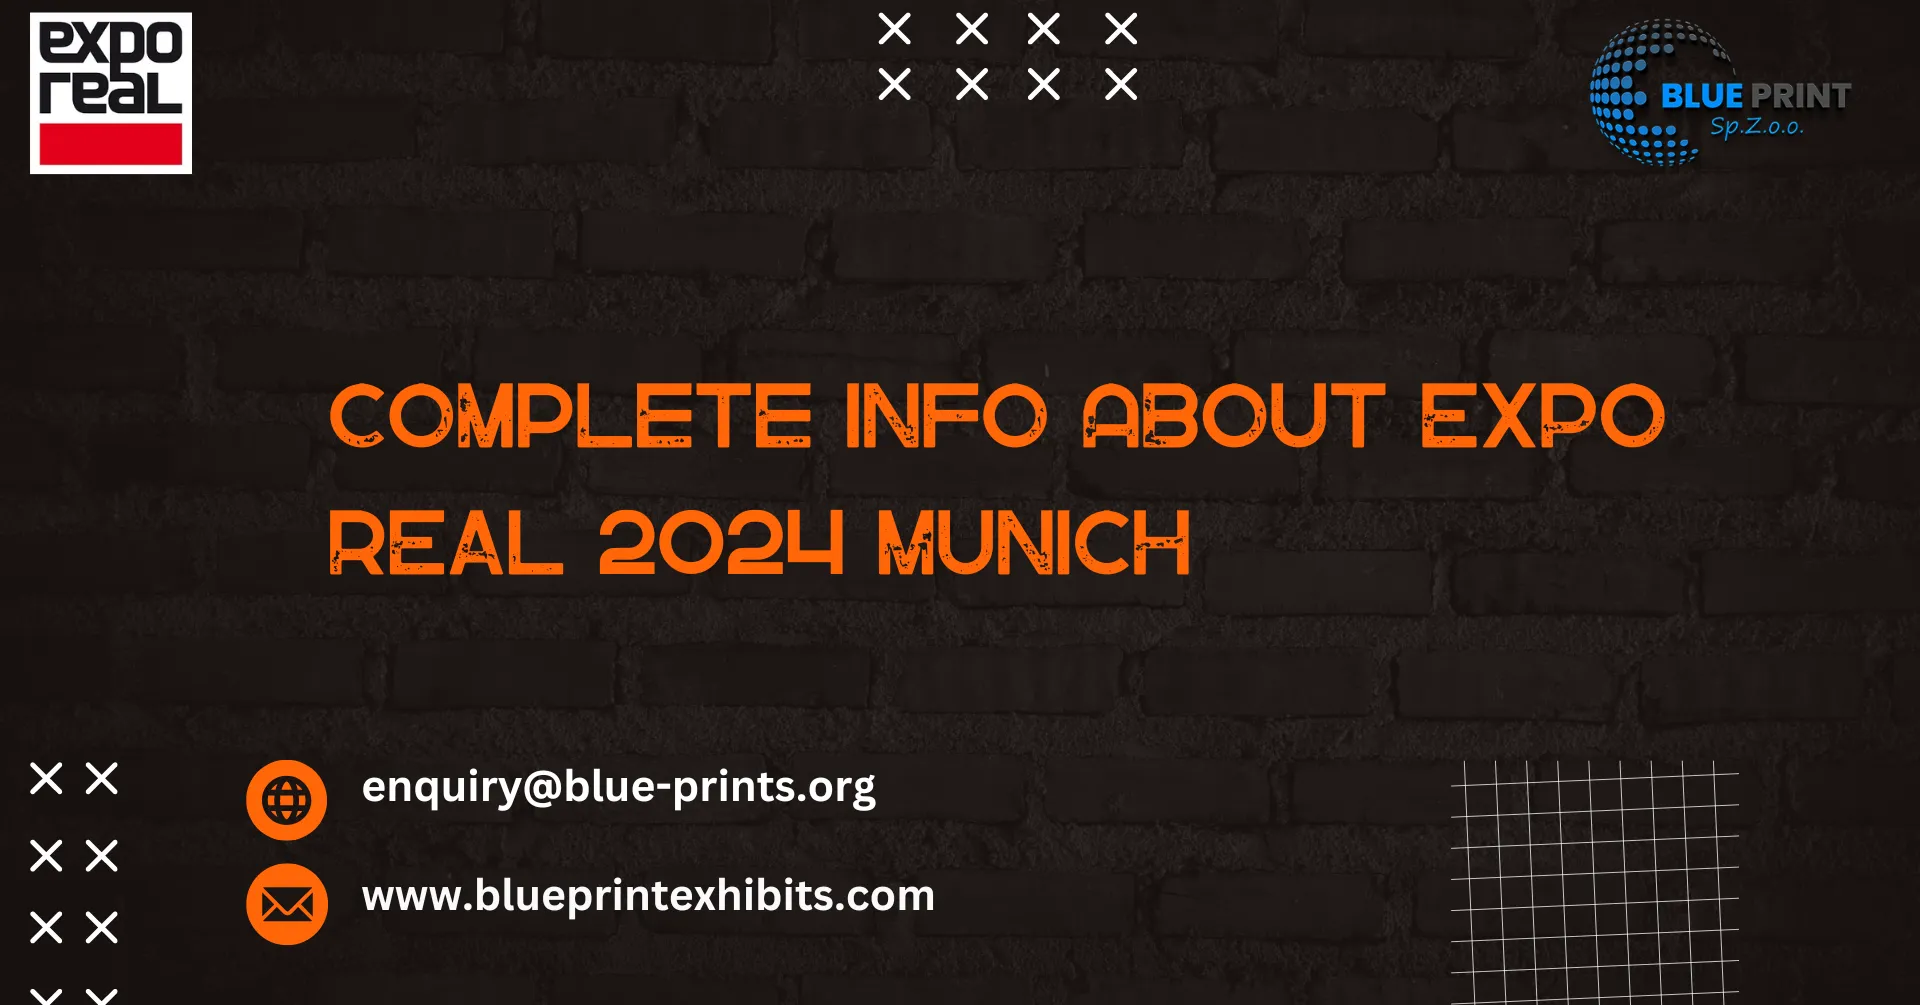 Complete info about EXPO REAL 2024 Munich